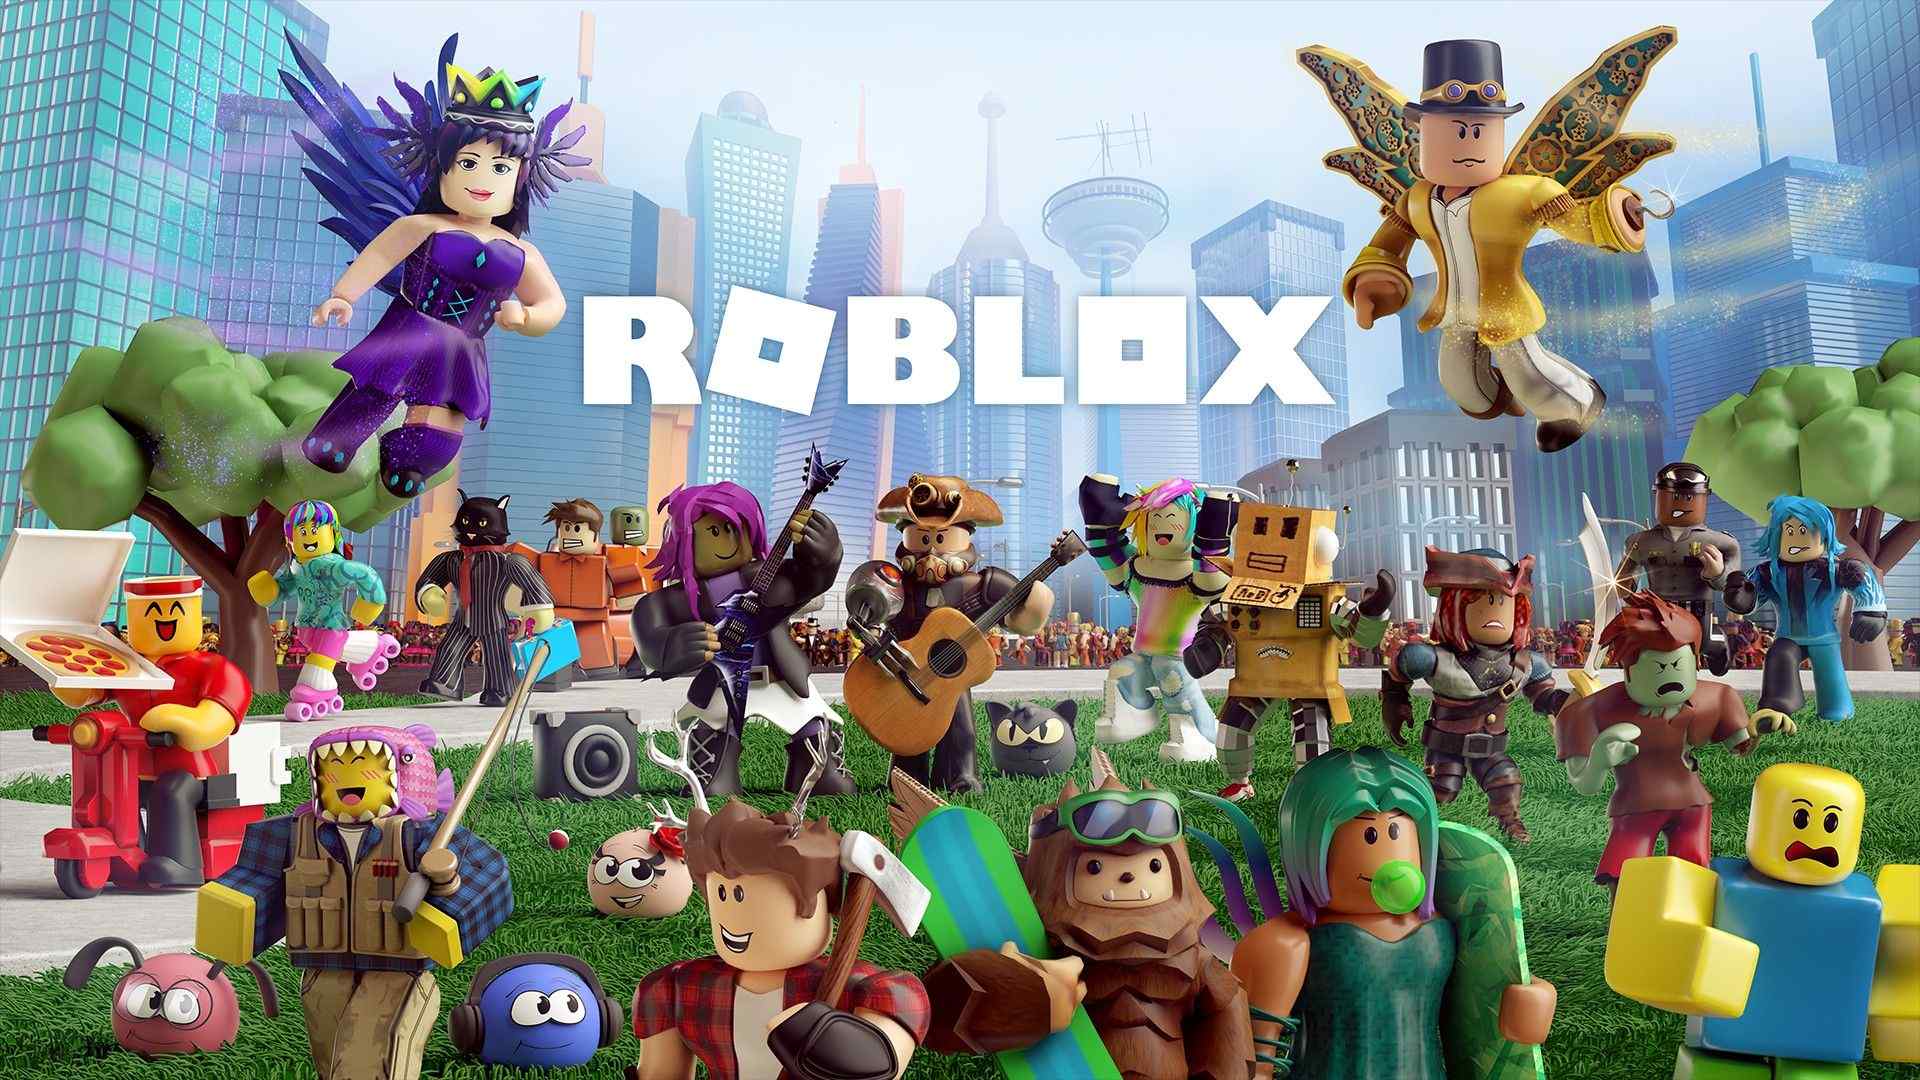 Rоblox 4k Wallpaper - Rblx Full 4k Wallpapers APK for Android Download